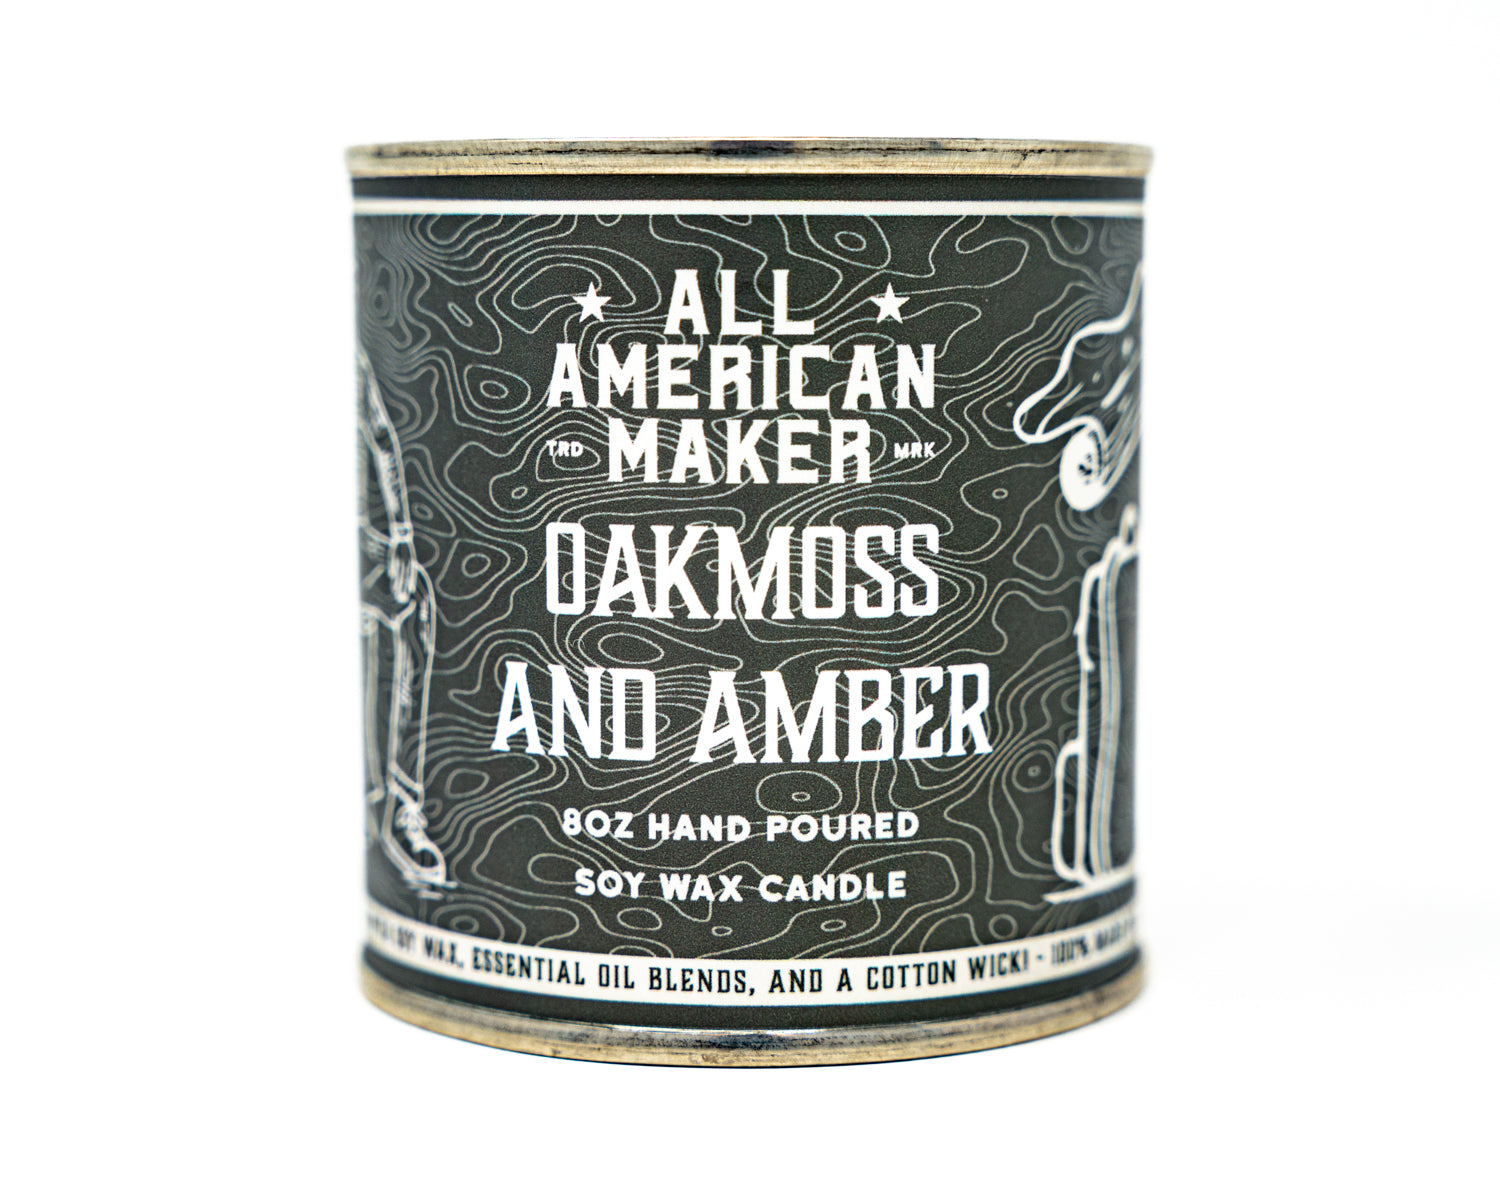 Front view of the Oakmoss and Amber All American Maker Candle